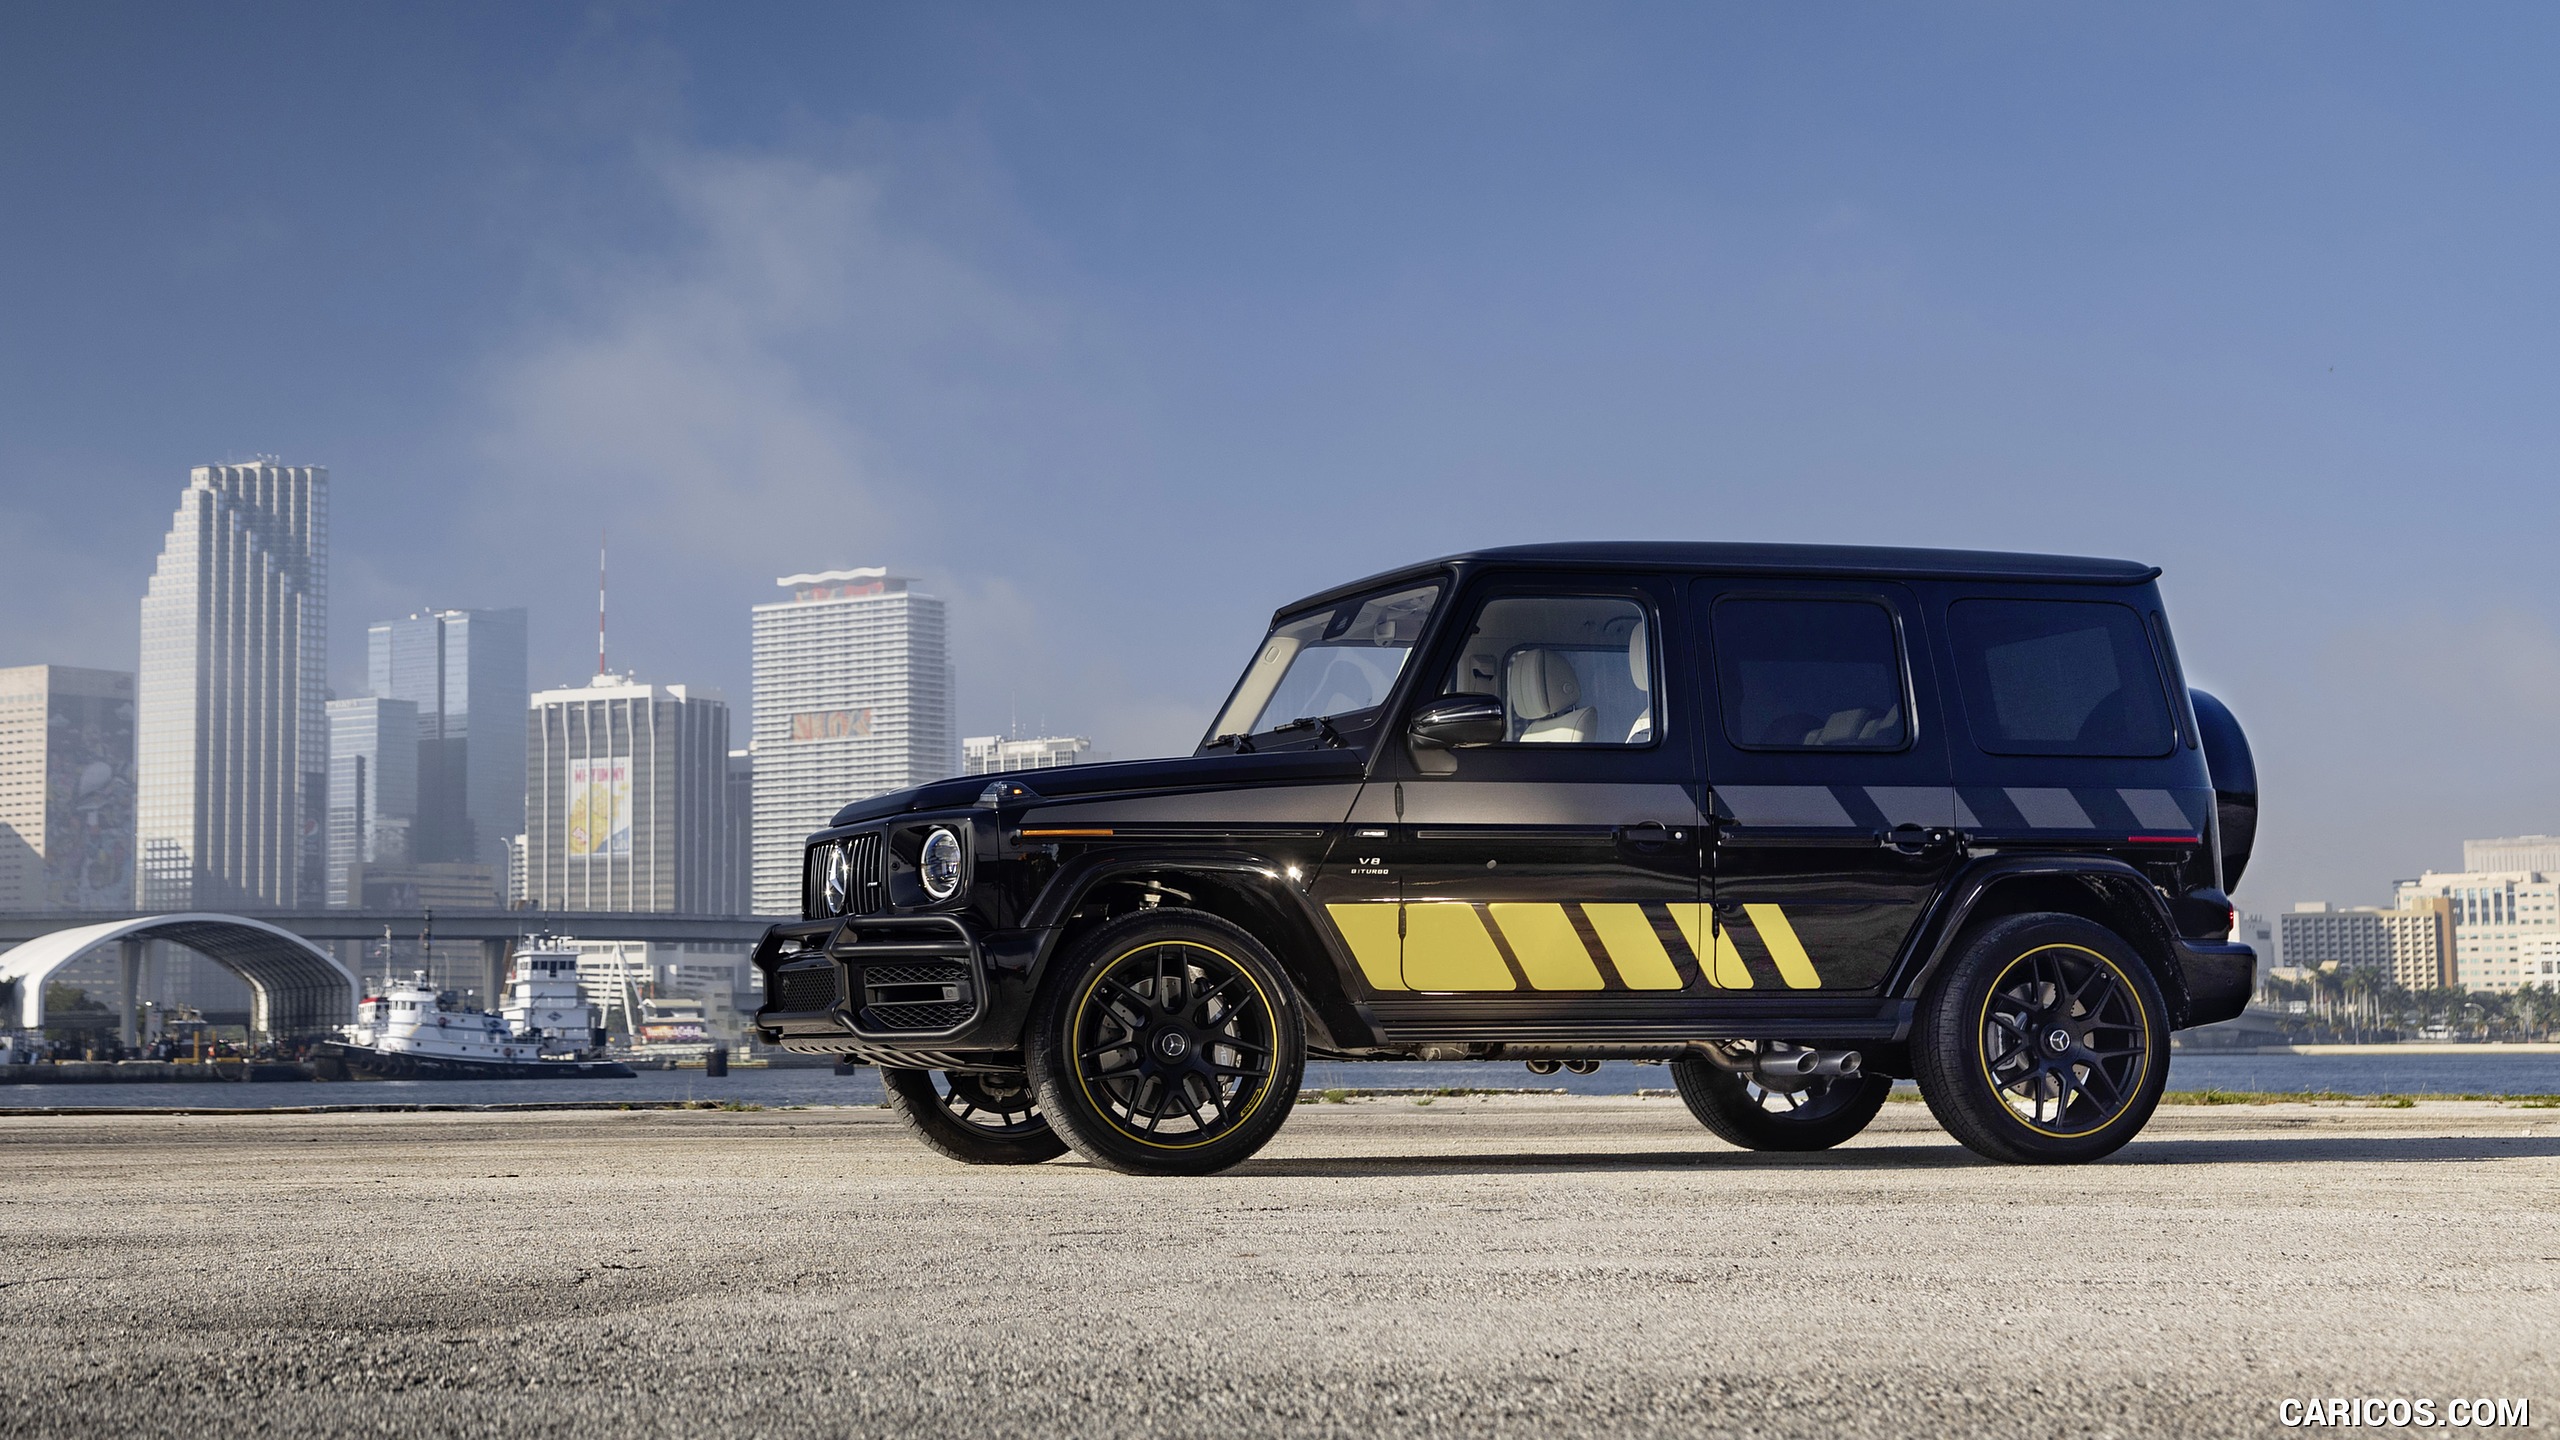 2020 Mercedes-AMG G 63 Cigarette Edition - Front Three-Quarter, #6 of 14